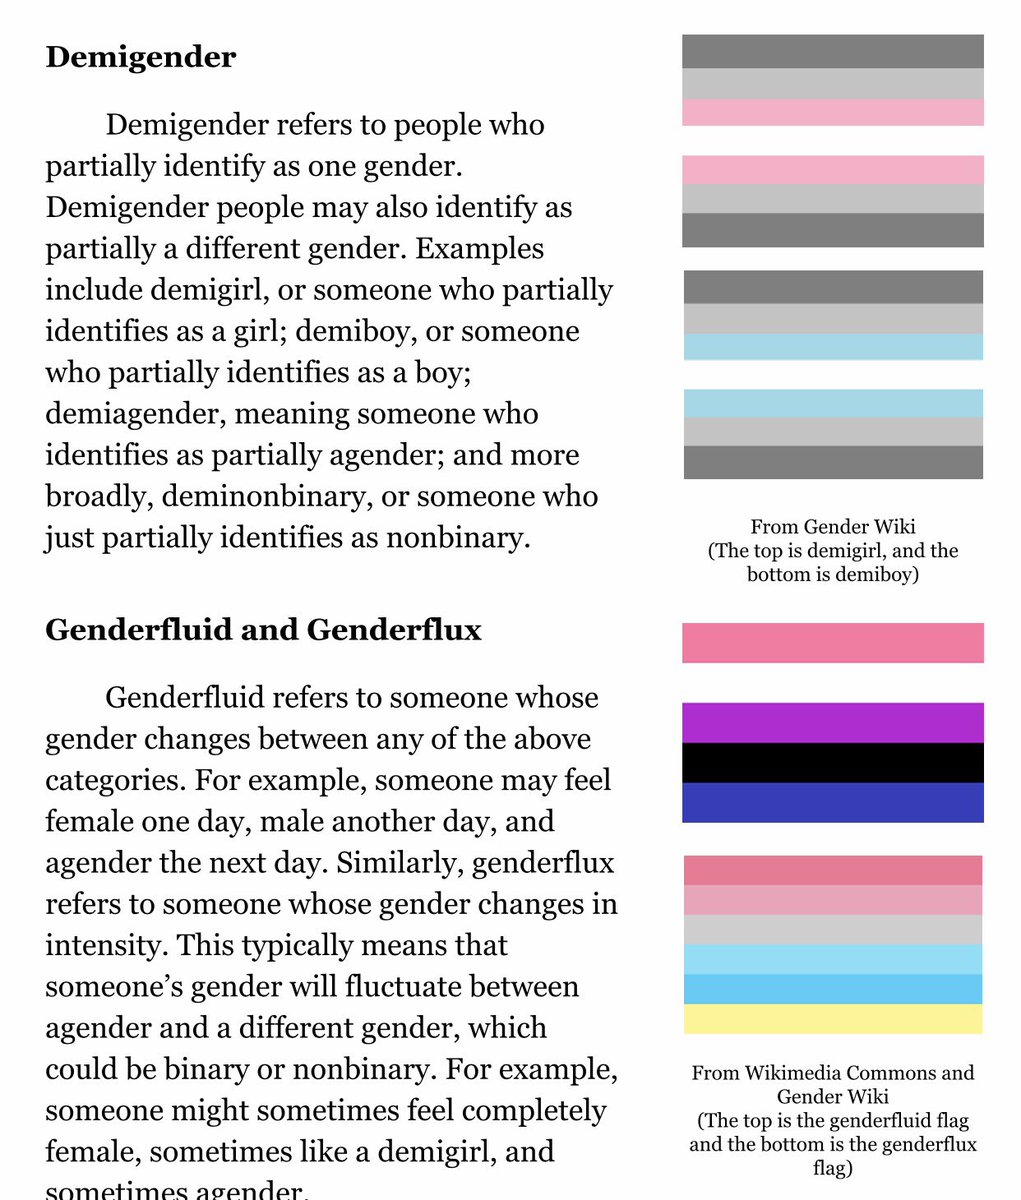 The top part describes the term demigender: 'Demigender refers to people who partially identify as one gender. Demigender people may also identify as partially a different gender. Examples include demigirl, or someone who partially identifies as a girl; demiboy, or someone who partially identifies as a boy; demiagender, meaning someone who identifies as partially agender; and more broadly, deminonbinary, or someone who just partially identifies as nonbinary.' The demigirl and demiboy flags are shown to the right (both flags including grey, light grey, white, and pink/blue - pink for the former, blue for the latter). The bottom part talks about the terms genderfluid and genderflux: 'Genderfluid refers to someone whose gender changes between any of the above categories [referring to previously stated gender identities within the original post]. For example, someone may feel female one day, male another day, and agender the next day. Similarly, genderflux refers to someone whose gender changes in intensity. This typically means that someone's gender will fluctuate between agender and a different gender, which could be binary or nonbinary. For example, someone might sometimes feel completely female, sometimes like a demigirl, and sometimes agender.' The genderfluid and genderflux flags are shown to the right, with the former including pink, white, black, blue, and a purpleish color, & the latter using yellow, pink, a medium-light blue, a light blue, a light grey-ish color and a darker pink.